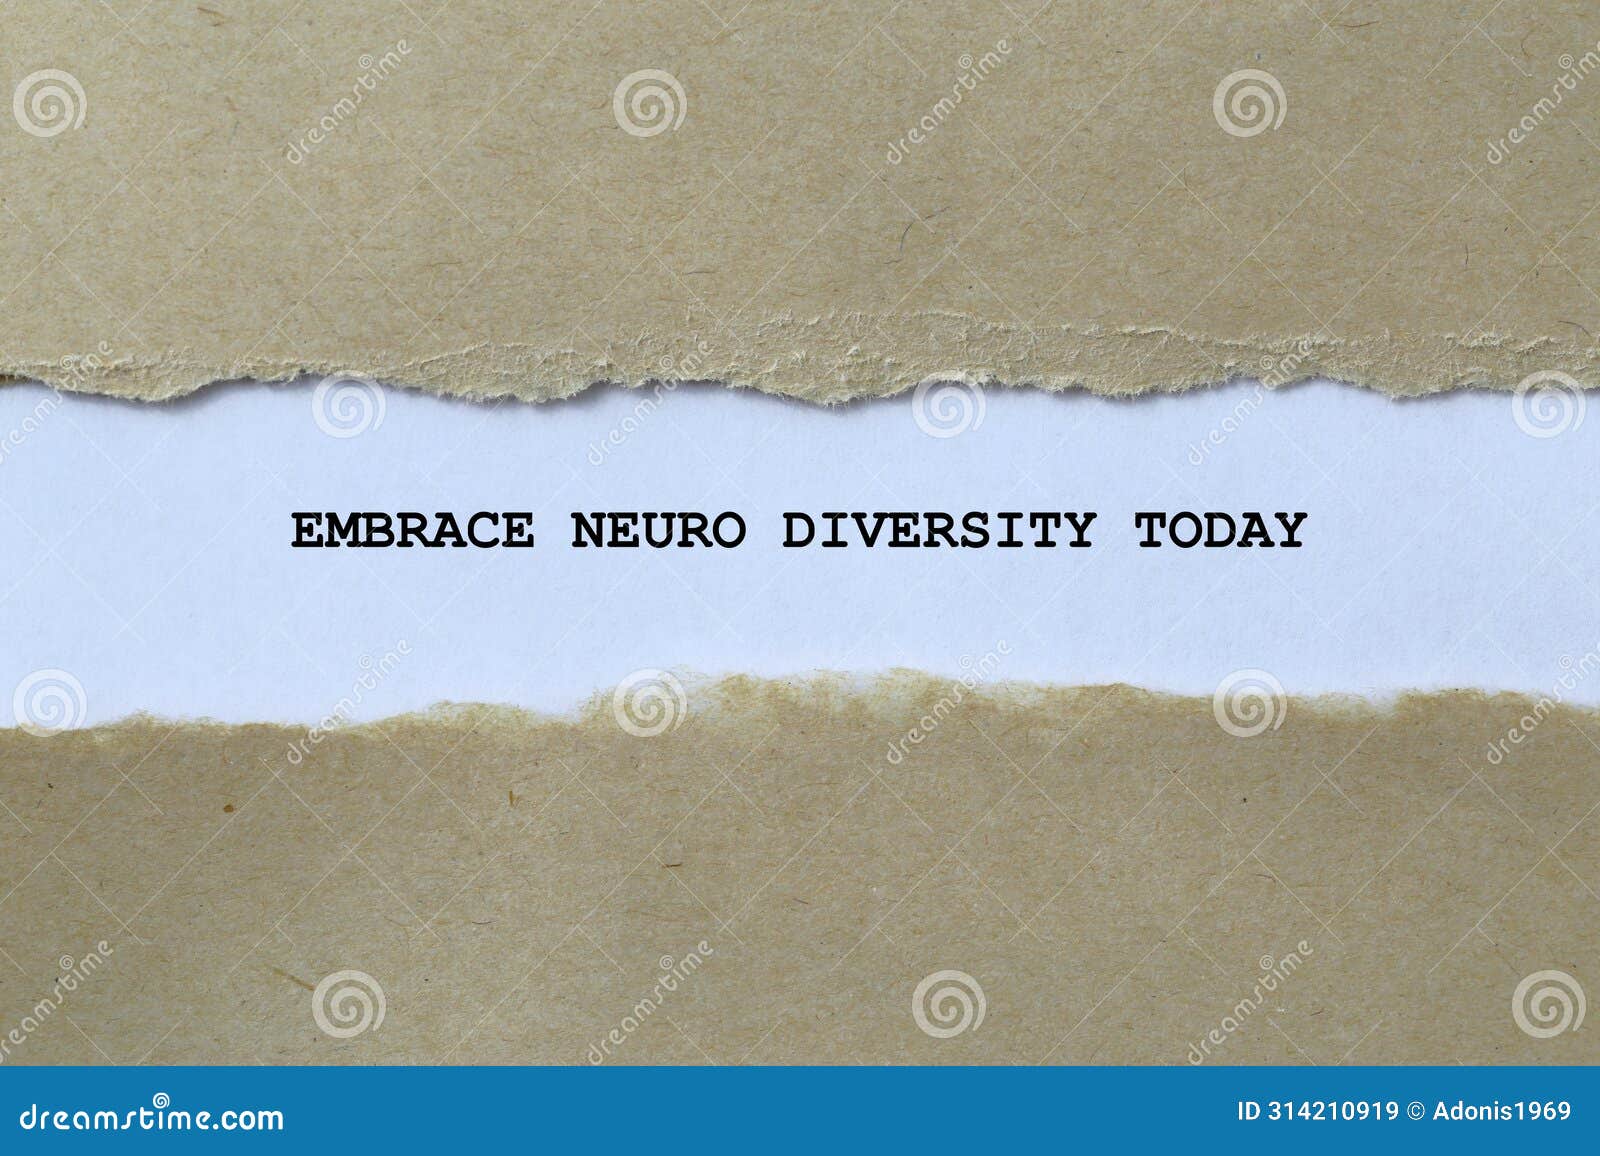 embrace neuro diversity today on white paper